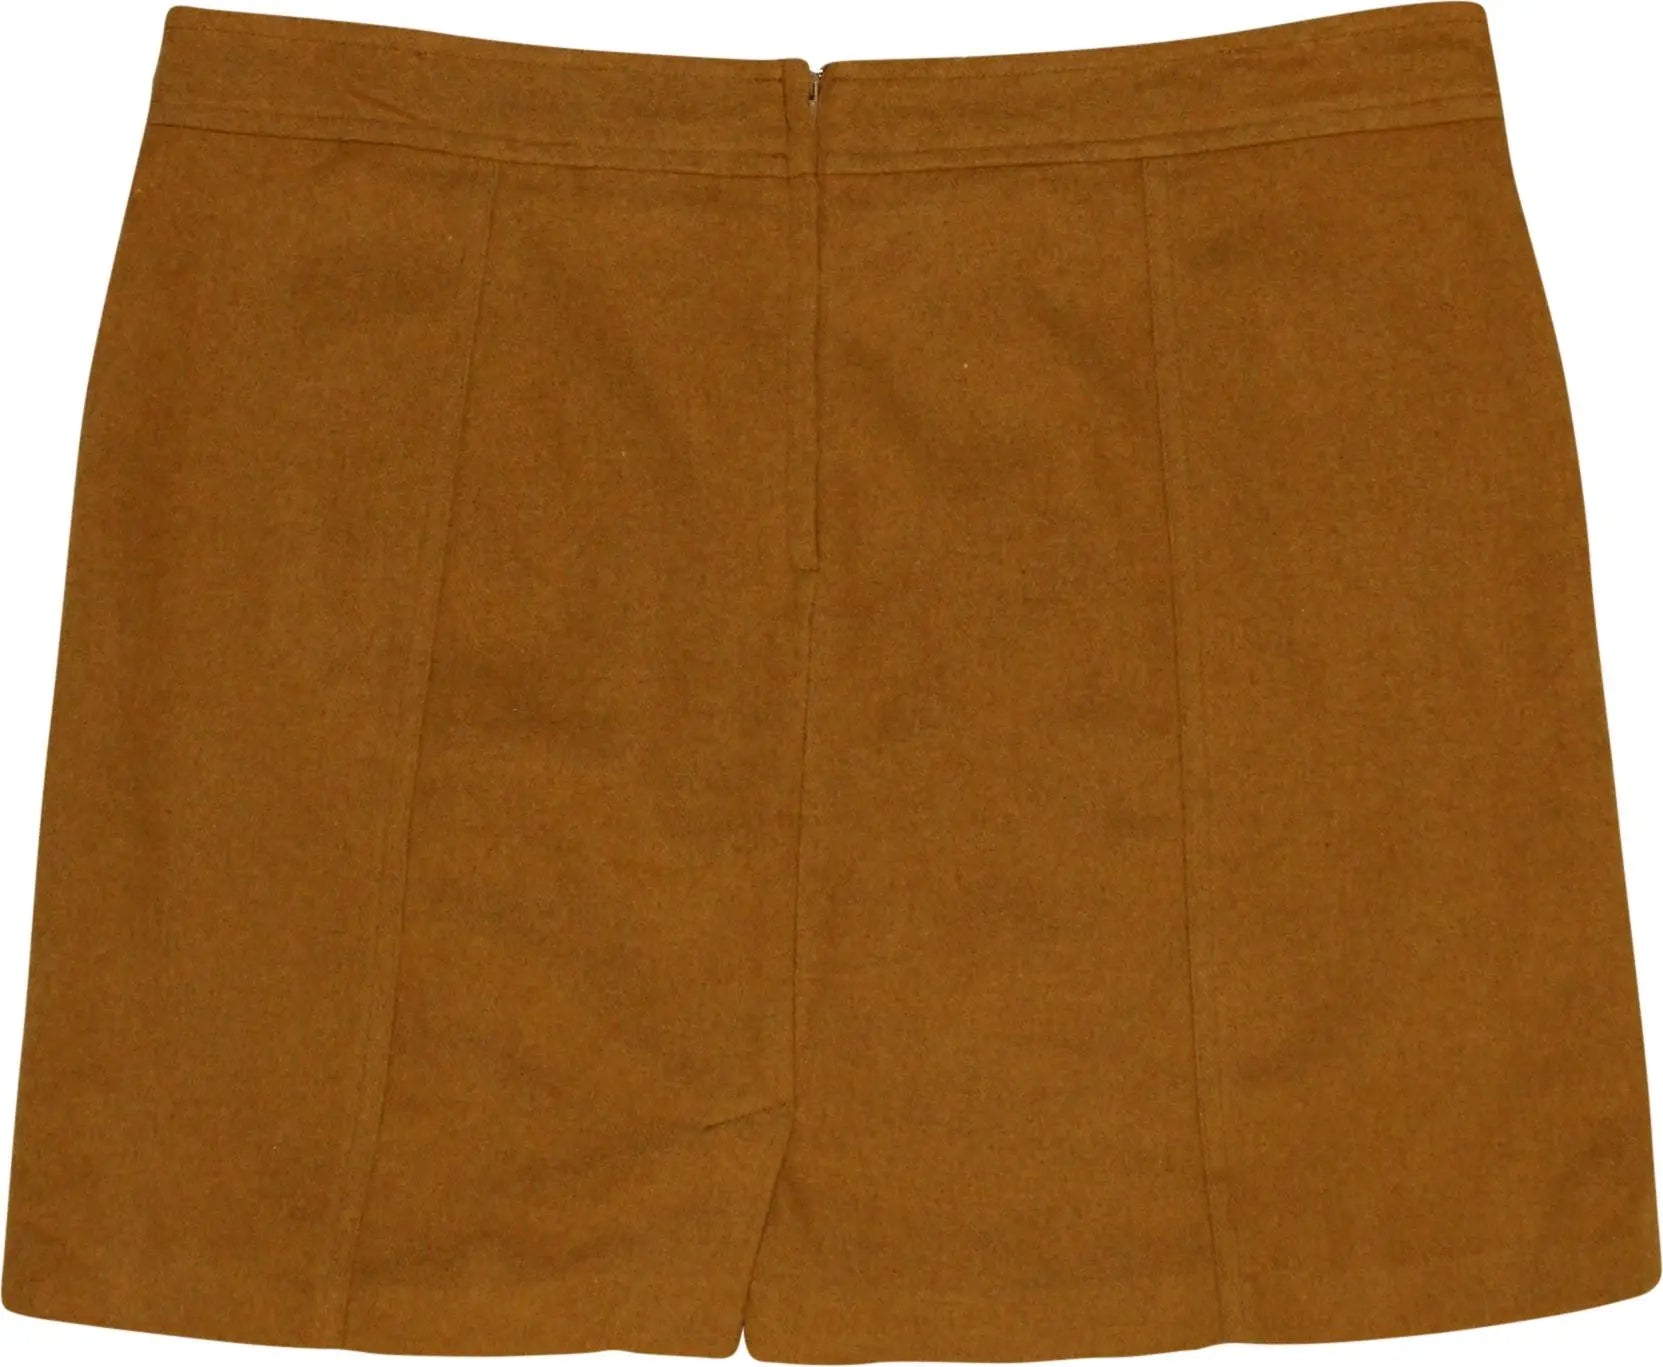 Trend One - Brown Short Skirt- ThriftTale.com - Vintage and second handclothing